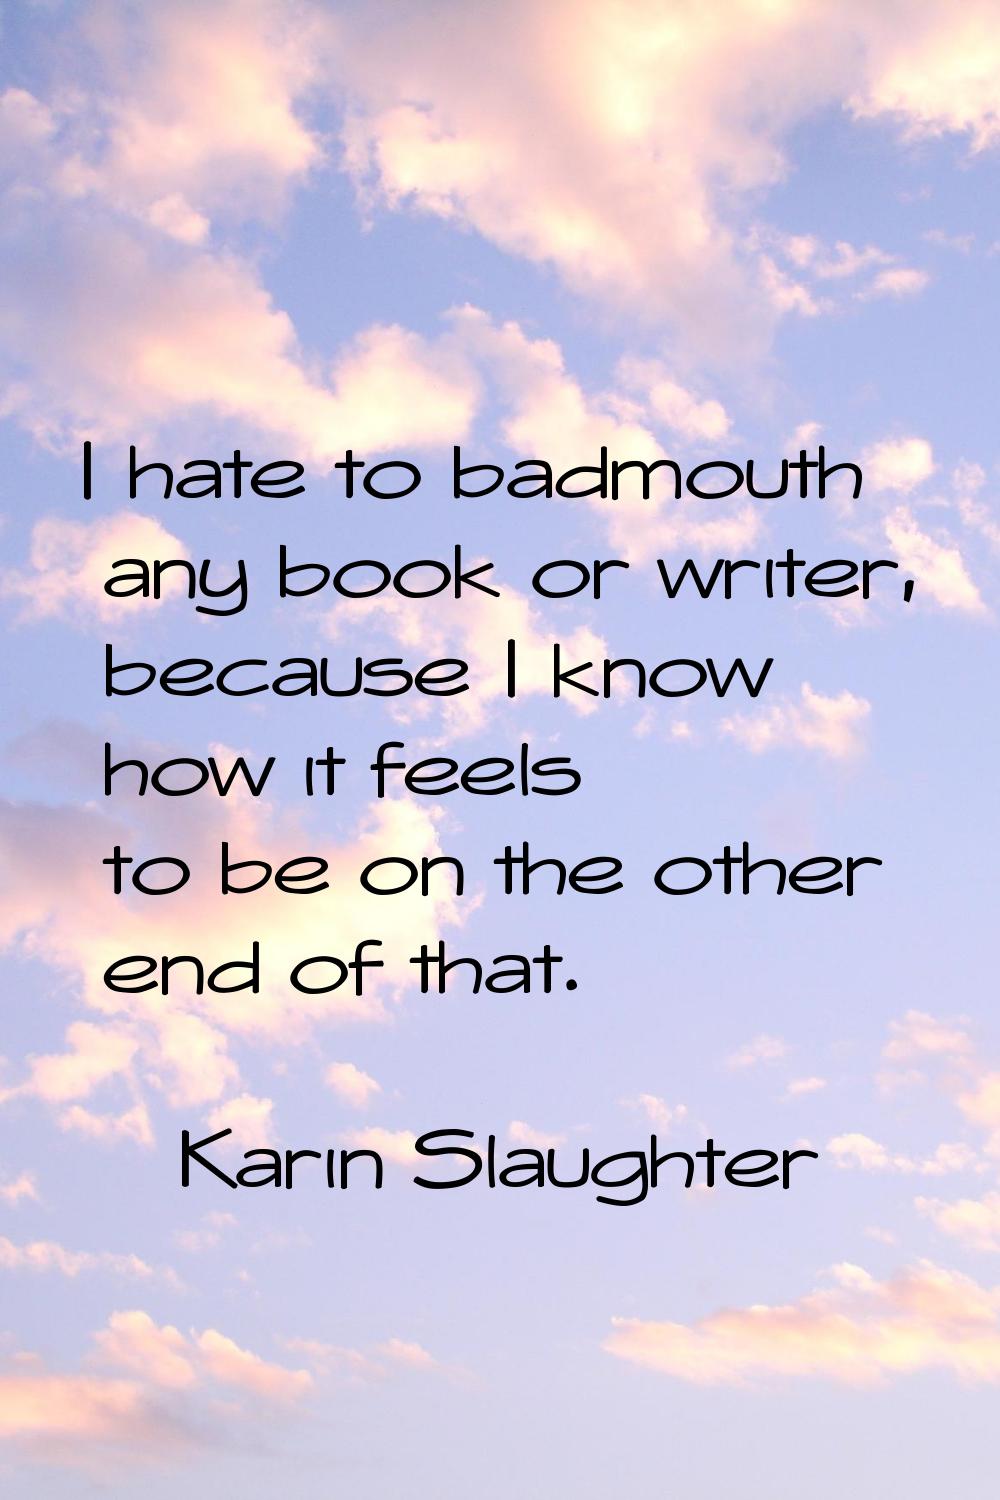 I hate to badmouth any book or writer, because I know how it feels to be on the other end of that.